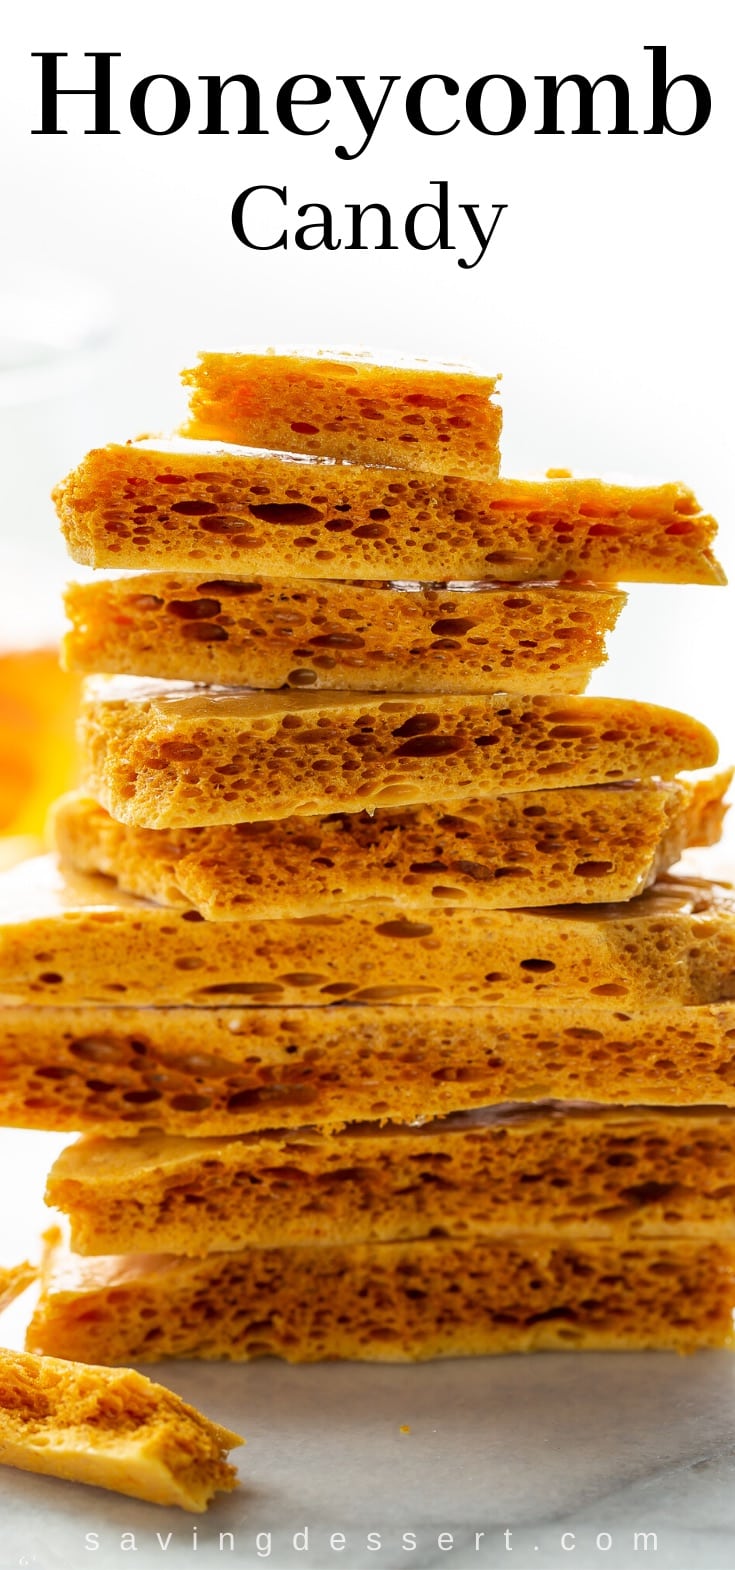 A stack of golden honeycomb brittle 